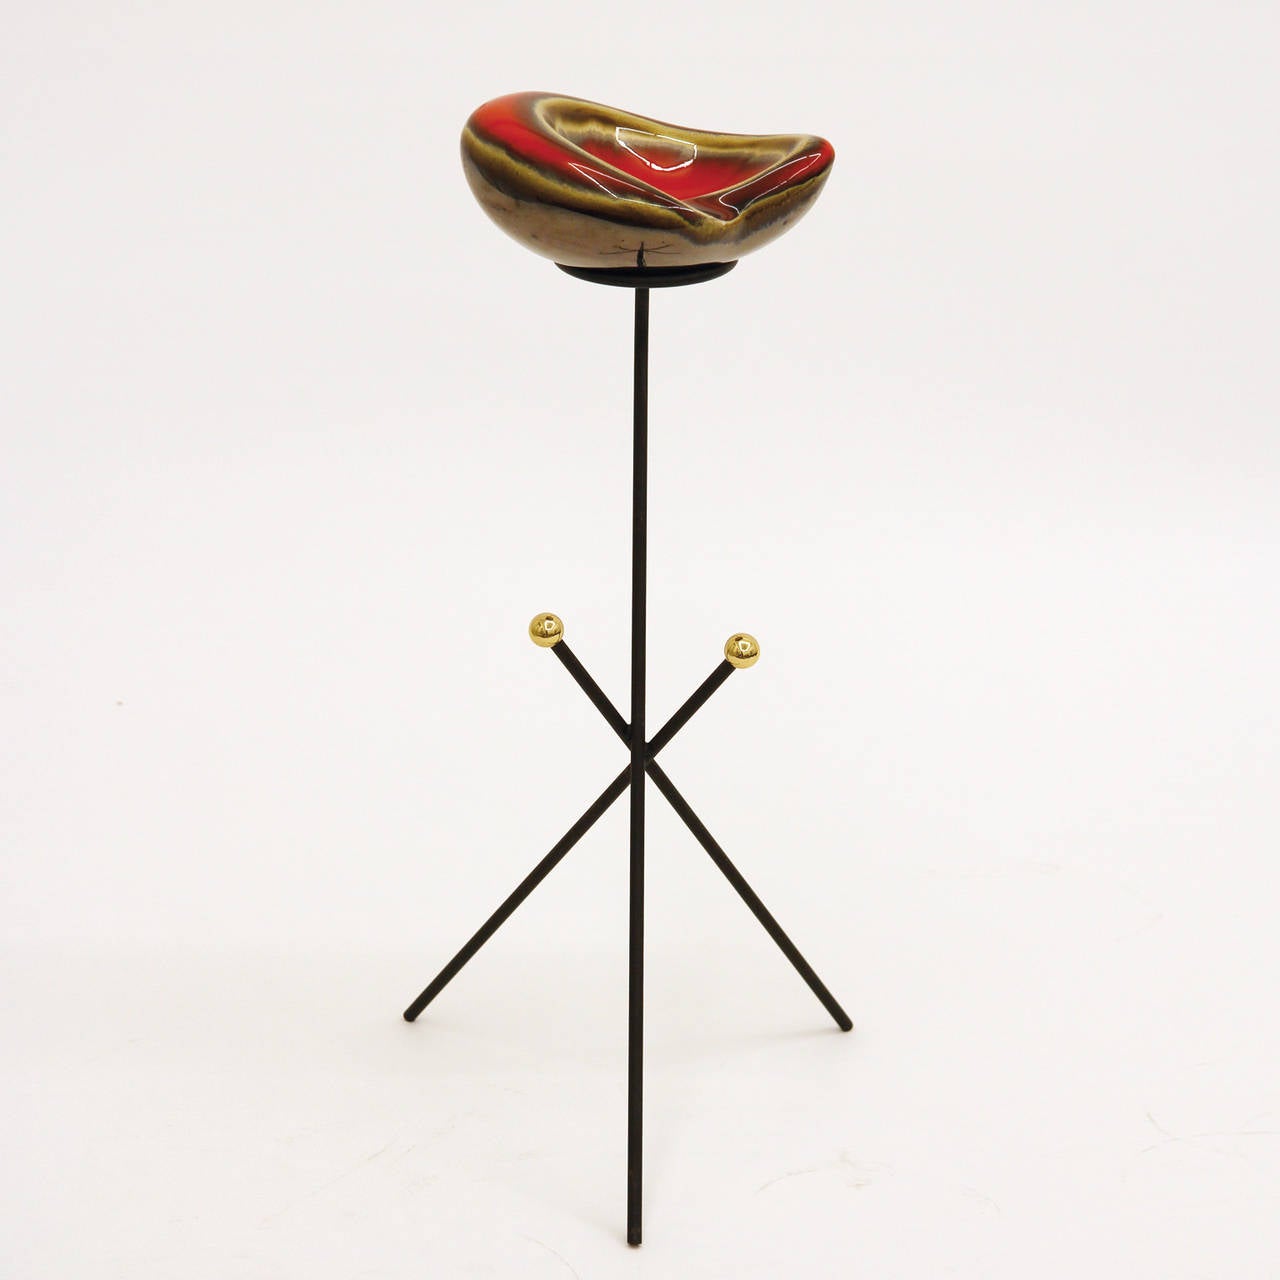 Elegant modernist ceramic ashtray or catch-all on a blackened iron tripod stand with two nice brass accent knobs. Interesting organic glazing to the ceramic ashtray which contrasts nicely with the stark Minimalist base. Very good original condition